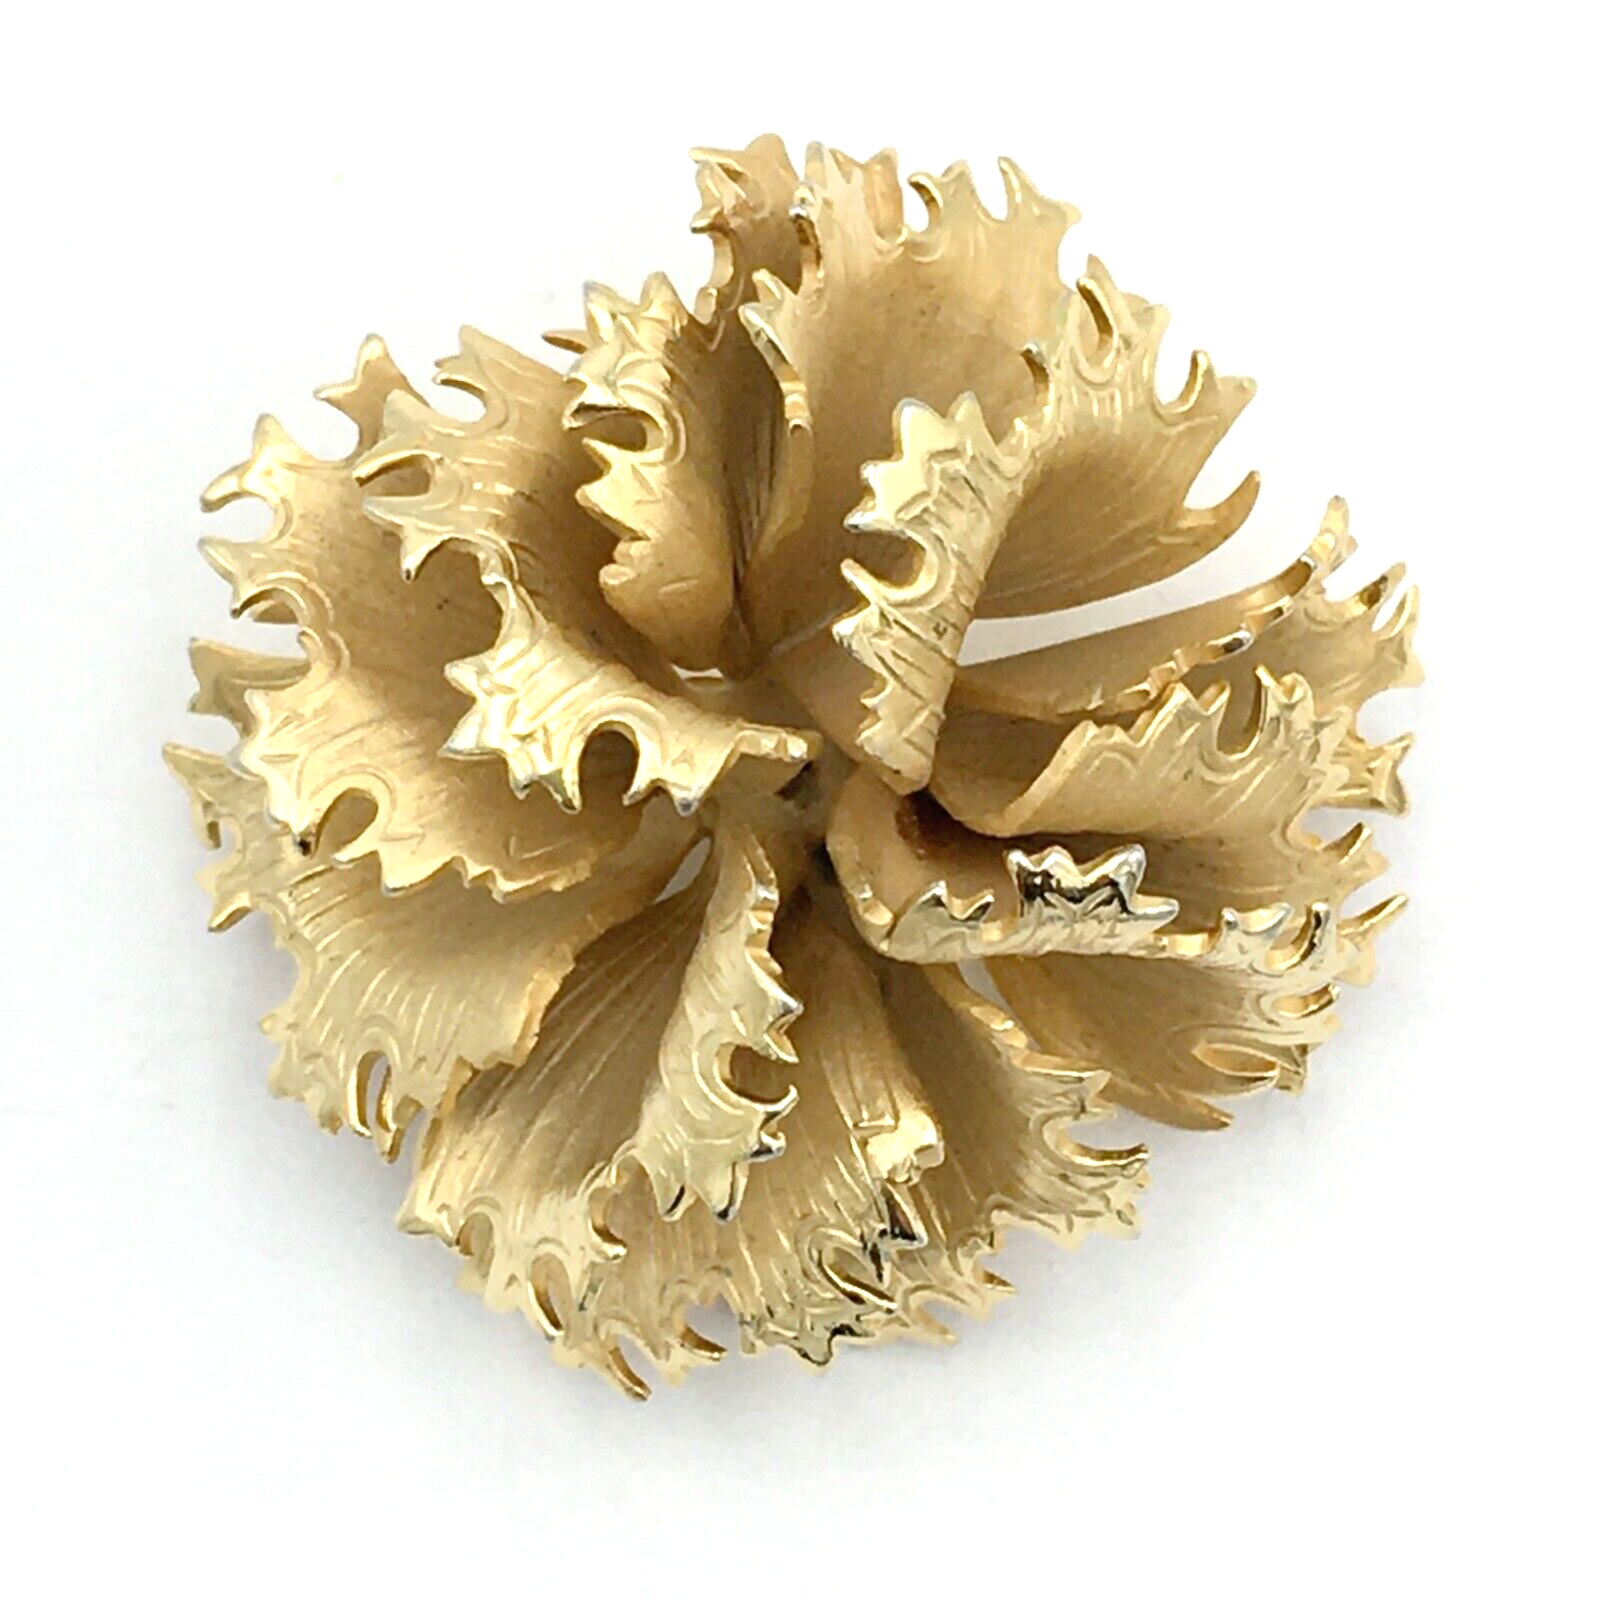 Primary image for LISNER vintage 1960s flower brooch - textured brushed gold-tone 3D dome 1.5" pin